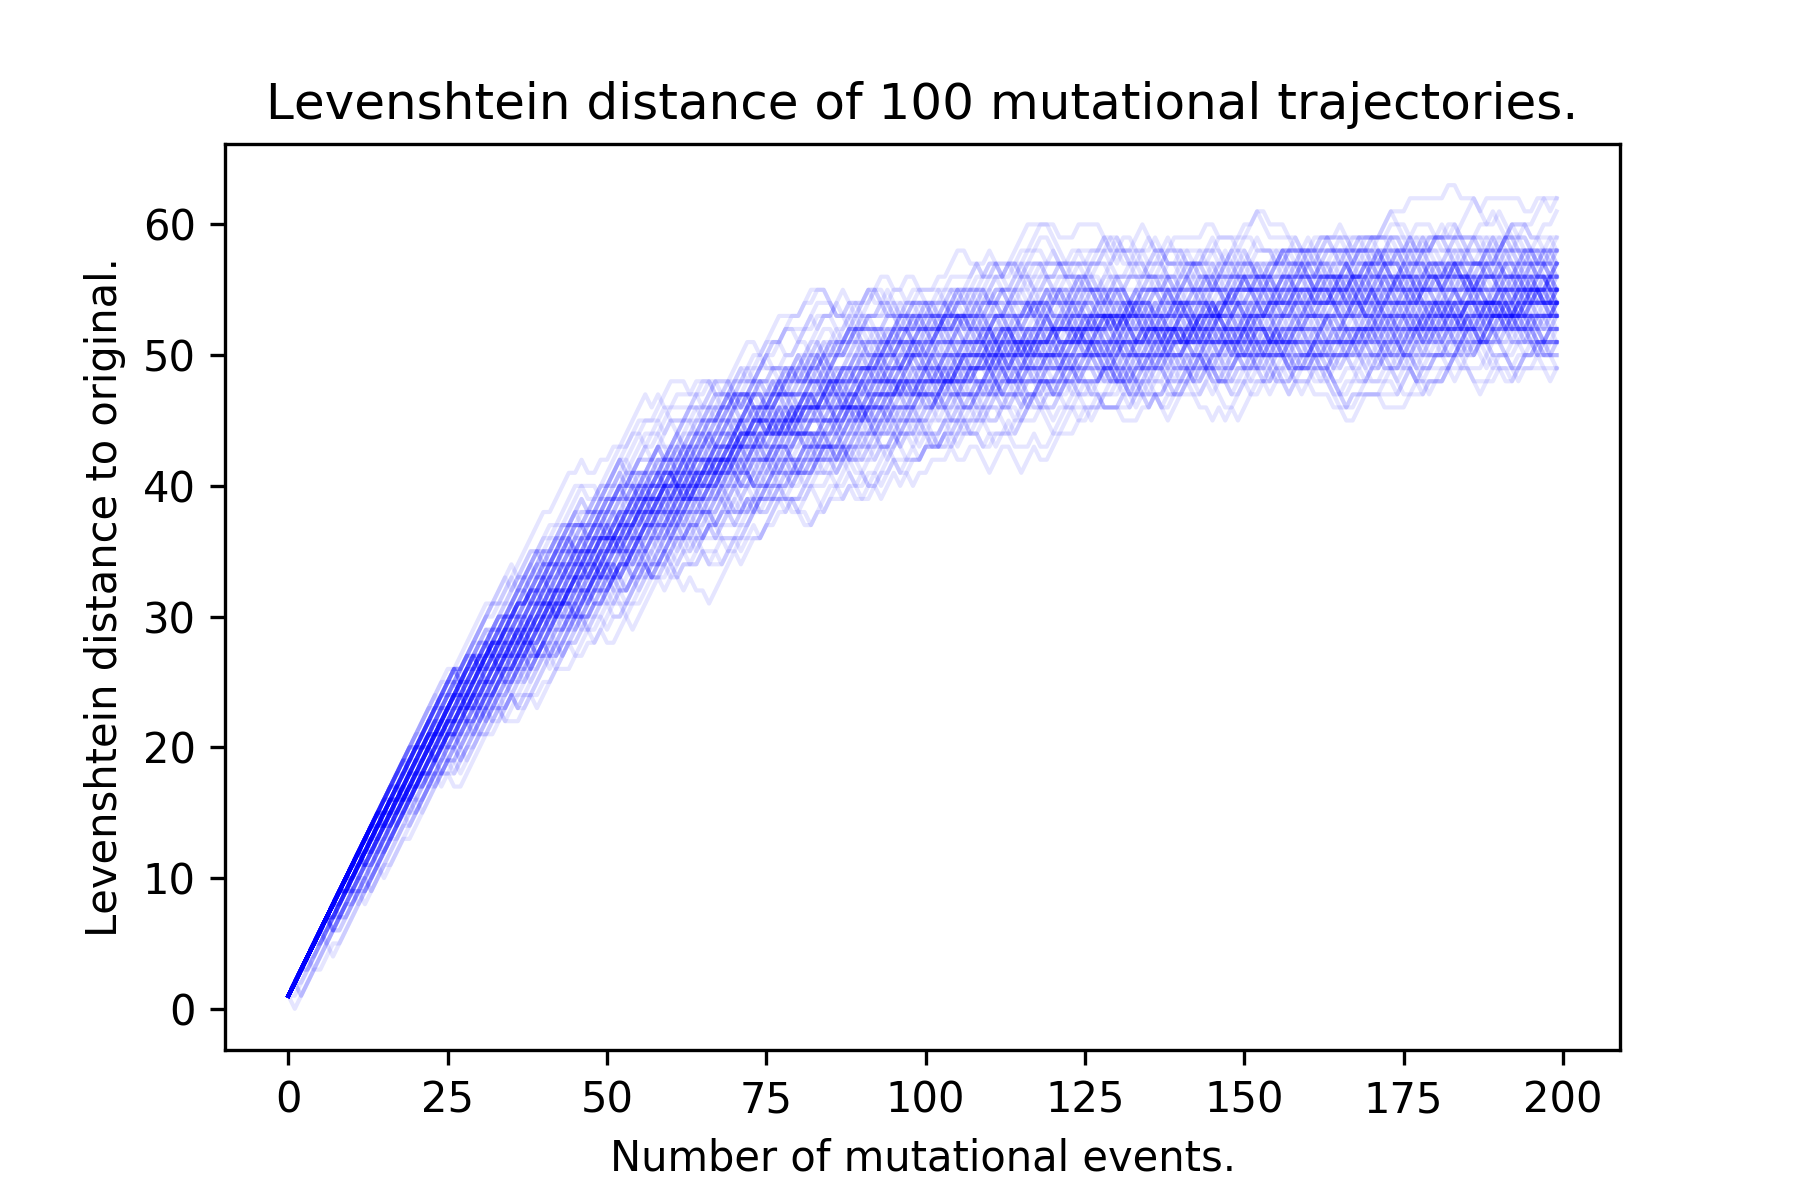 Figure 3: Levenshtein distance of 100 simulated trajectories.